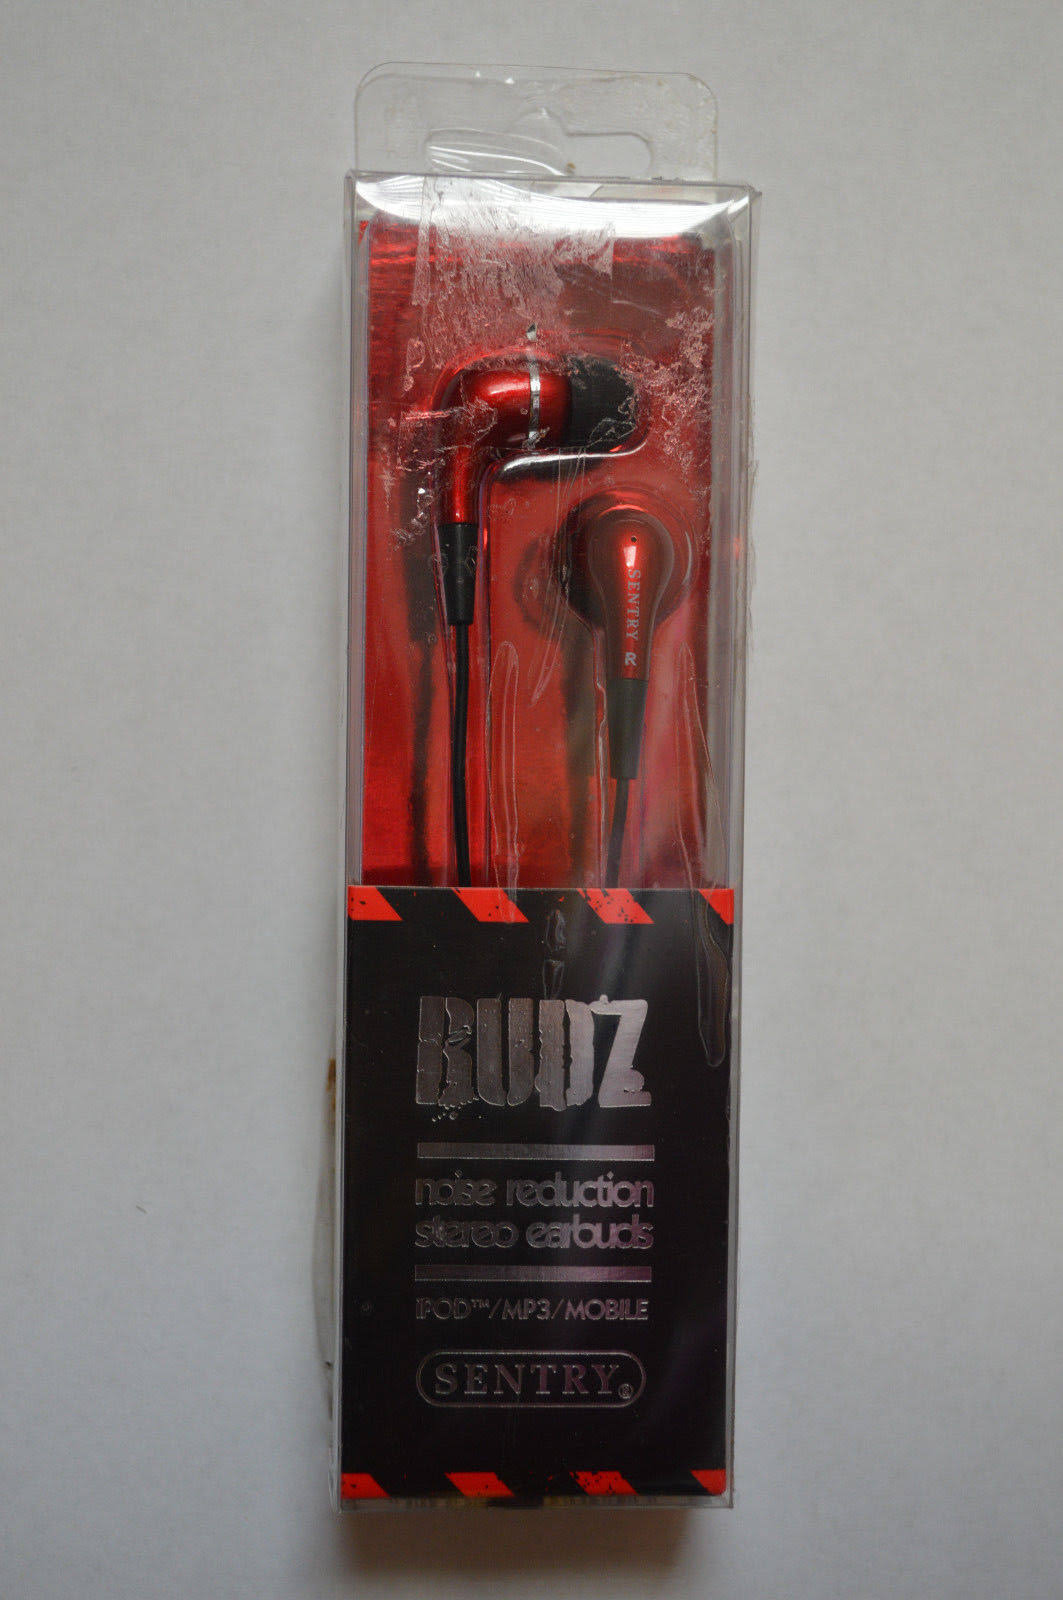 Sentry Budz Noise Reduction Ear Buds Color Varies - Sentry HO105